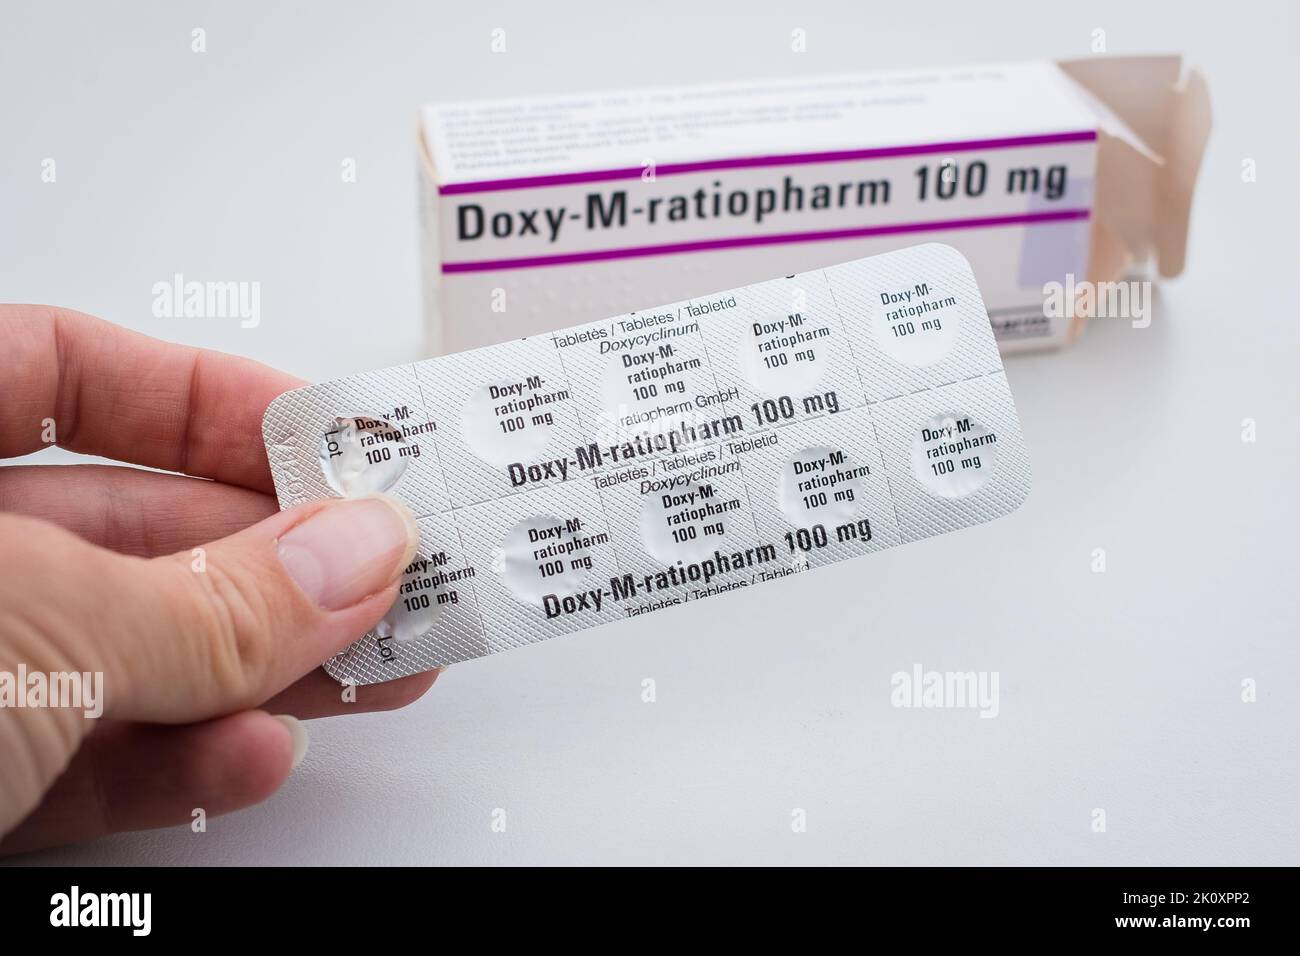 Woman taking Doxy-M-ratiopharm tablets by Ratiopharm for treating tick-borne borreliosis. Package of white pills. Pharmacy and medicine concept. Stock Photo